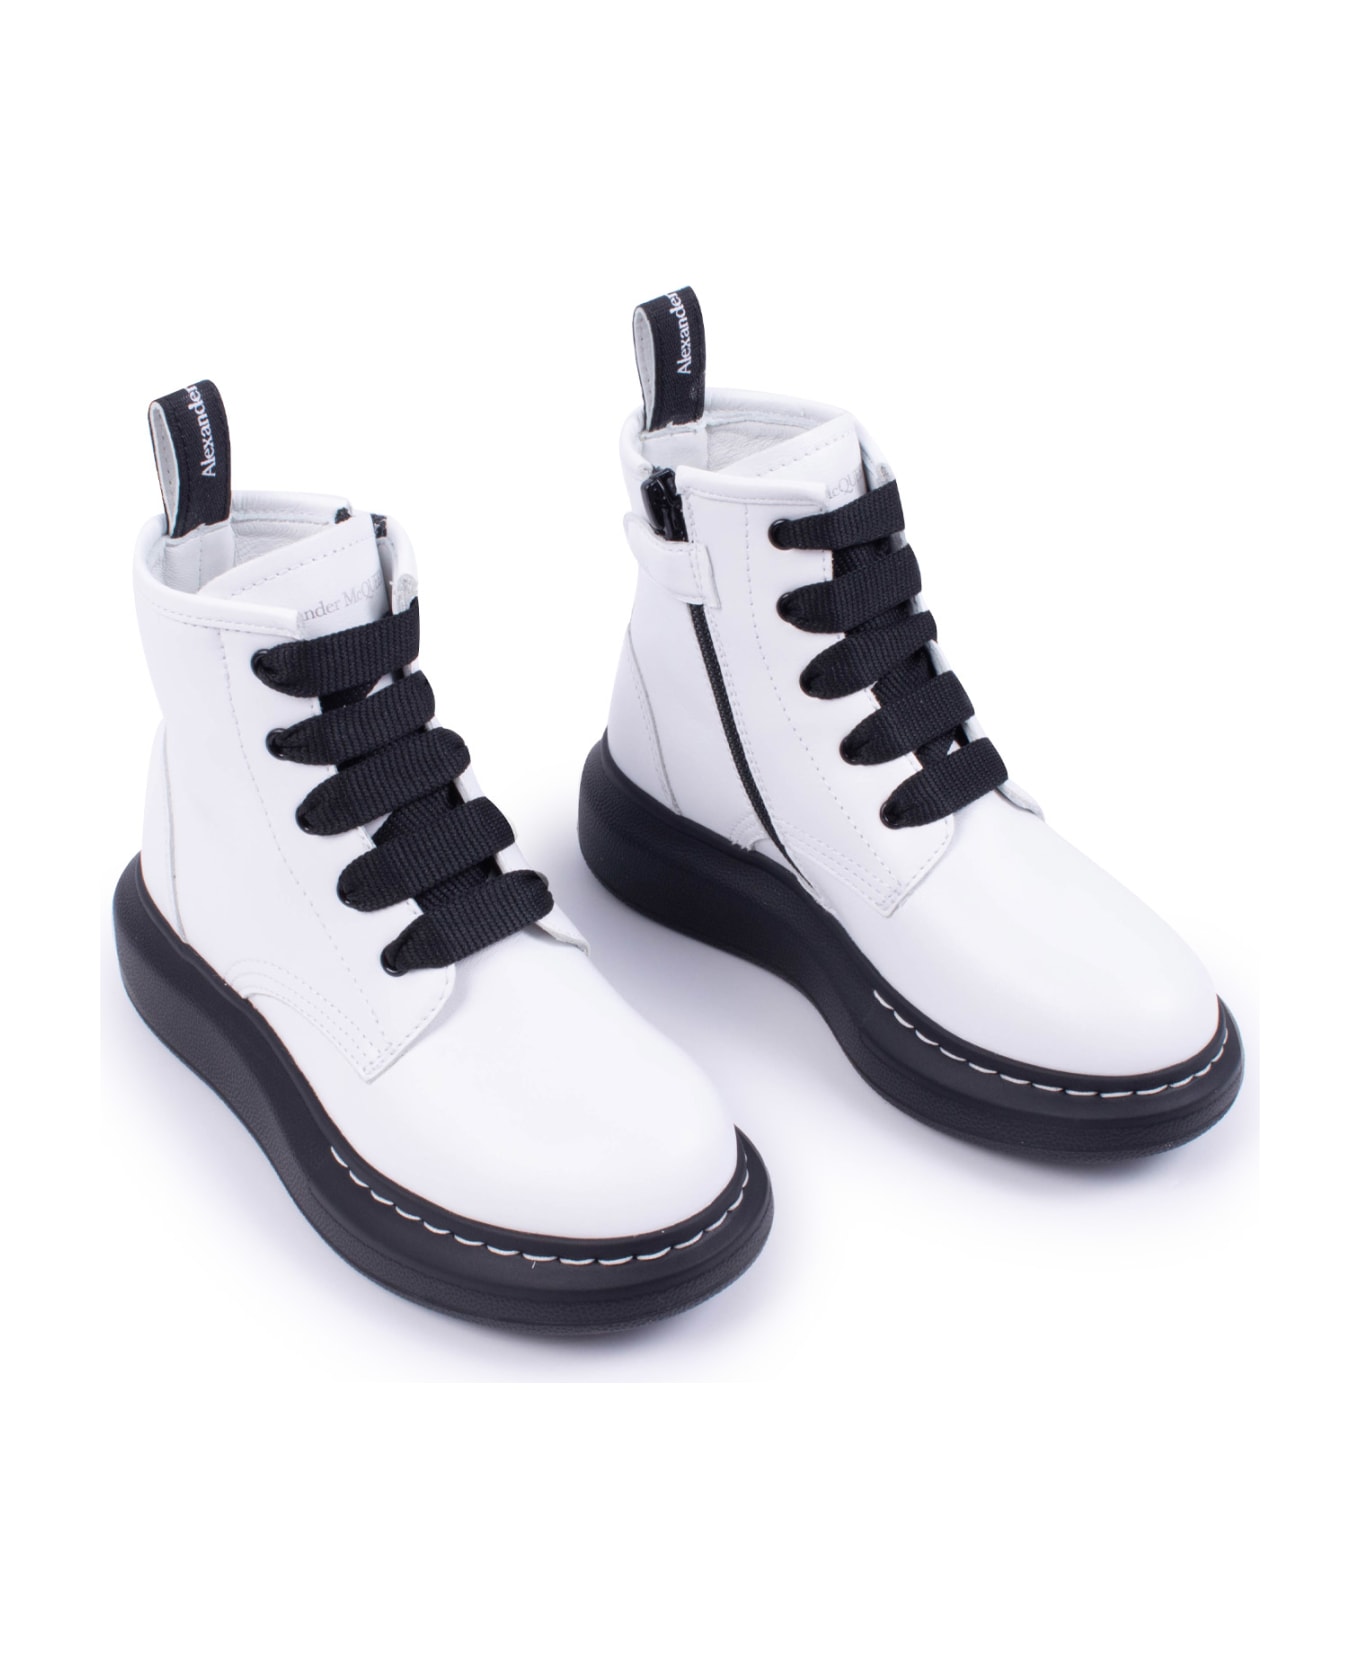 Alexander McQueen Leather Boots - White